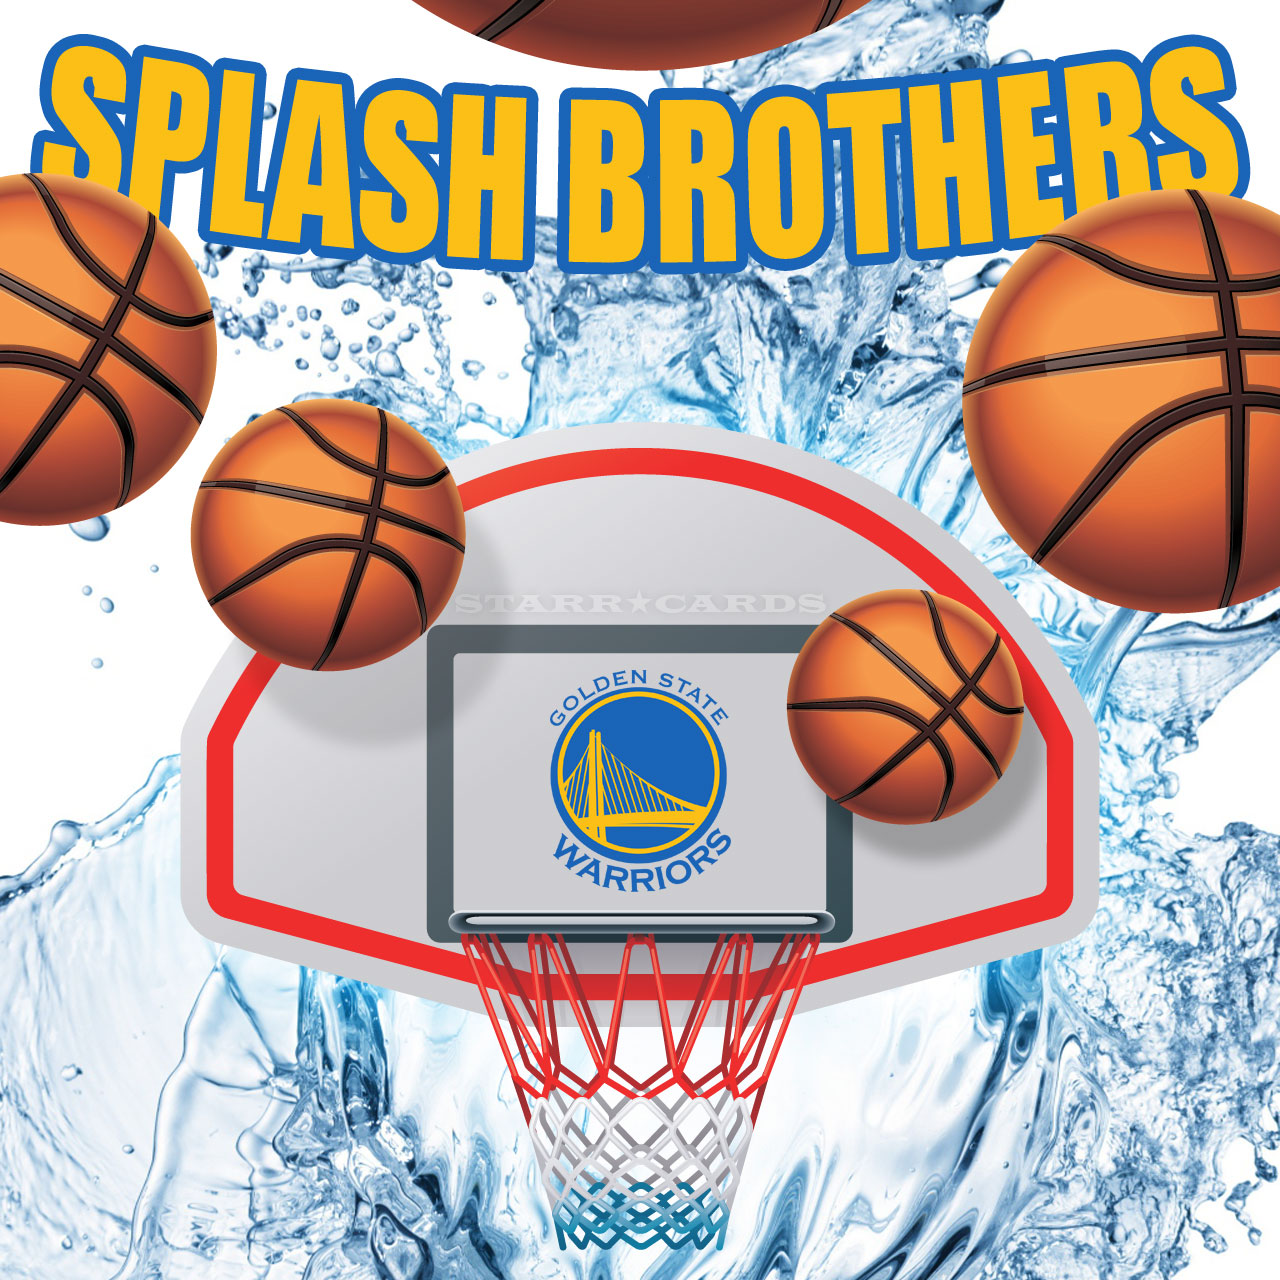 Splash Brothers rain 3-pointers for Golden State Warriors